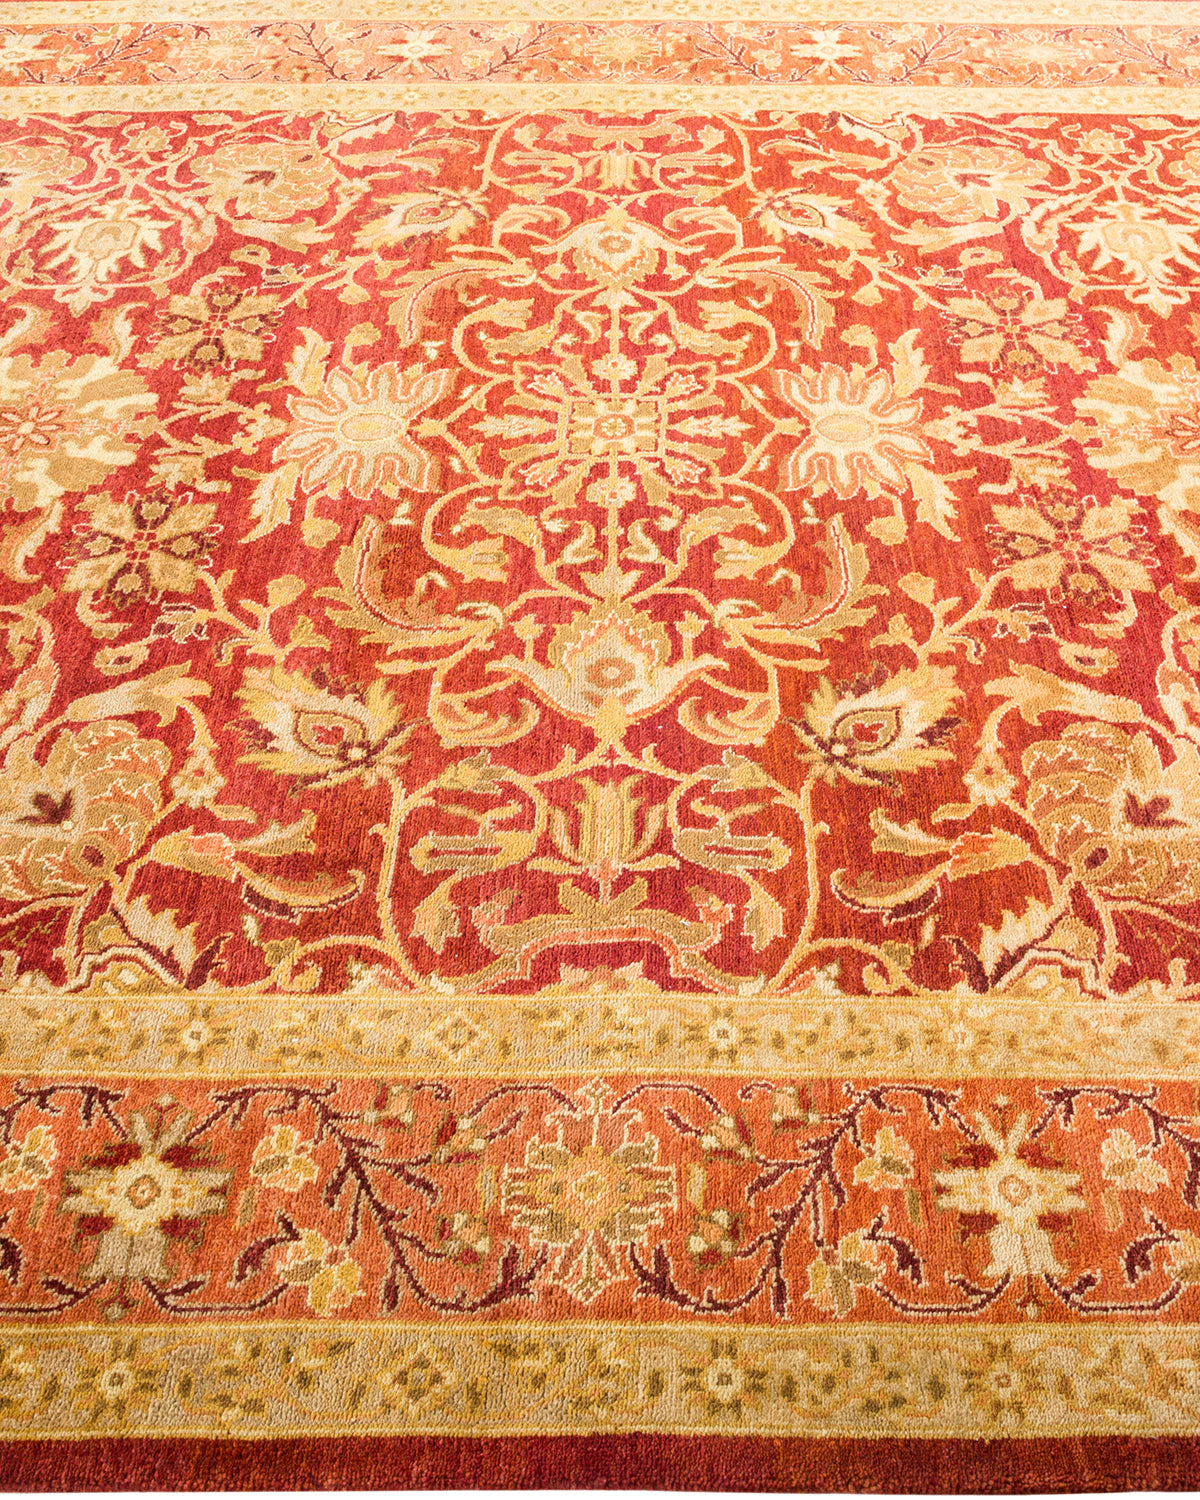 Eclectic, One-of-a-Kind Hand-Knotted Area Rug  - Orange, 6' 4" x 9' 3"